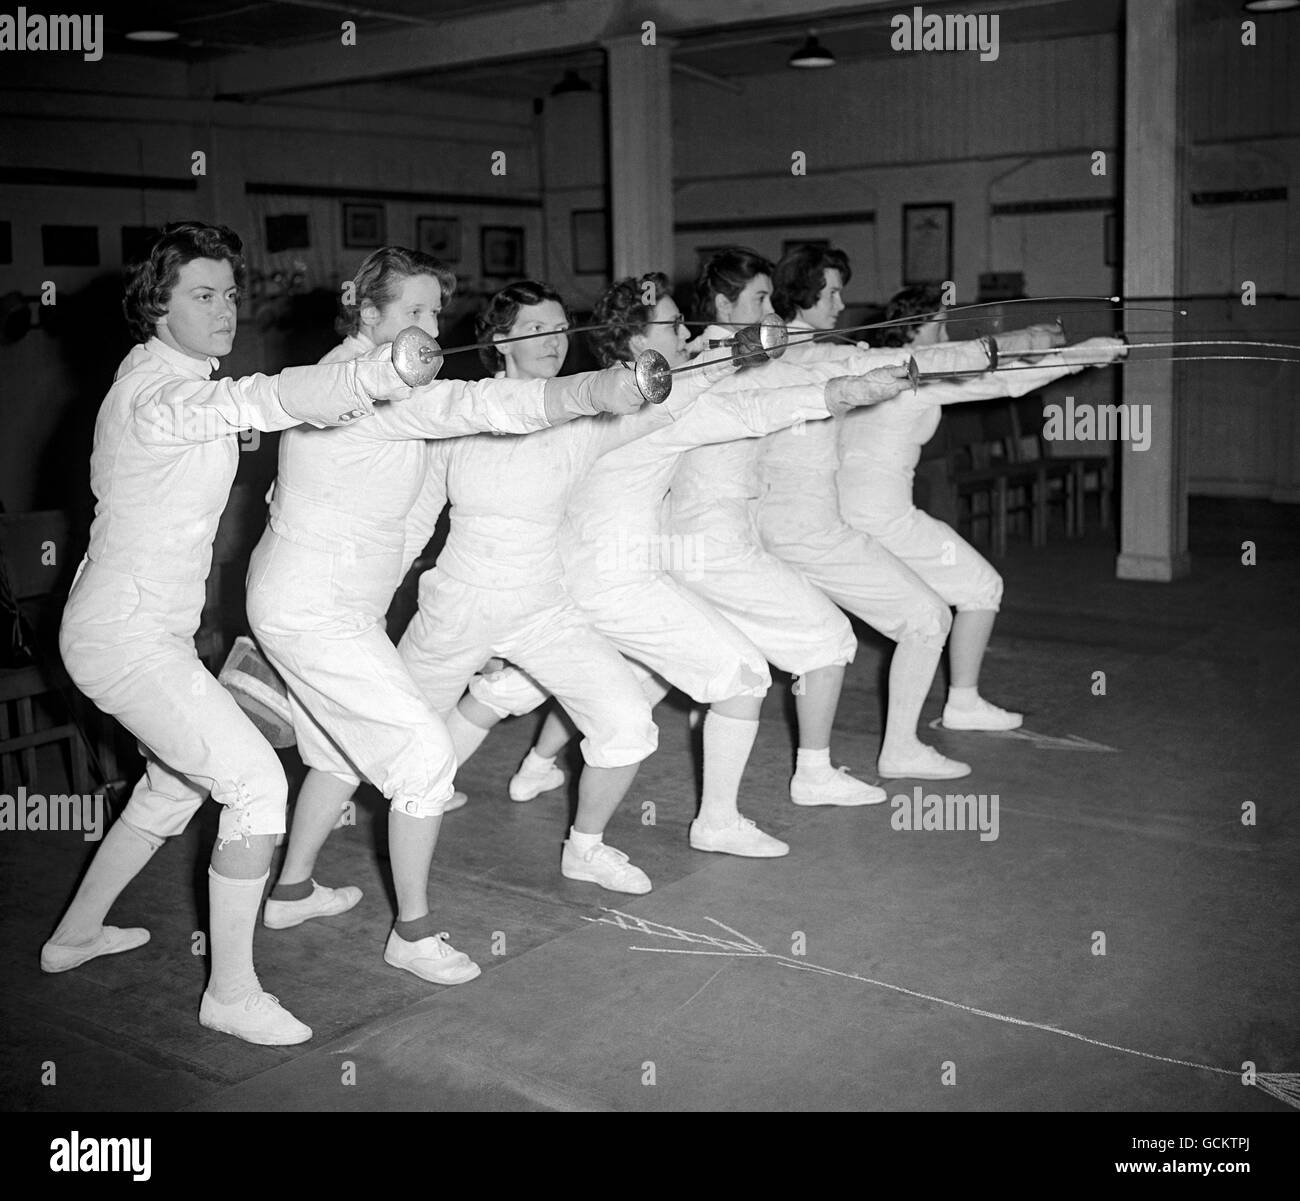 Ladies Foil Championship, at the ladies amateur fencing union headquarters in Hanover Square, London. In which Olympic gold medal winner Miss Gillian Sheen defends her title against an entry of 50. Among those who wish to relieve Miss Sheen of her title are (L-R) Miss R.Milward, Mrs. Hulbert, Miss P.Patient, Miss R.Gibbons, Miss S.Fleury, Mrs. Sellick and Miss G.Bater. Stock Photo